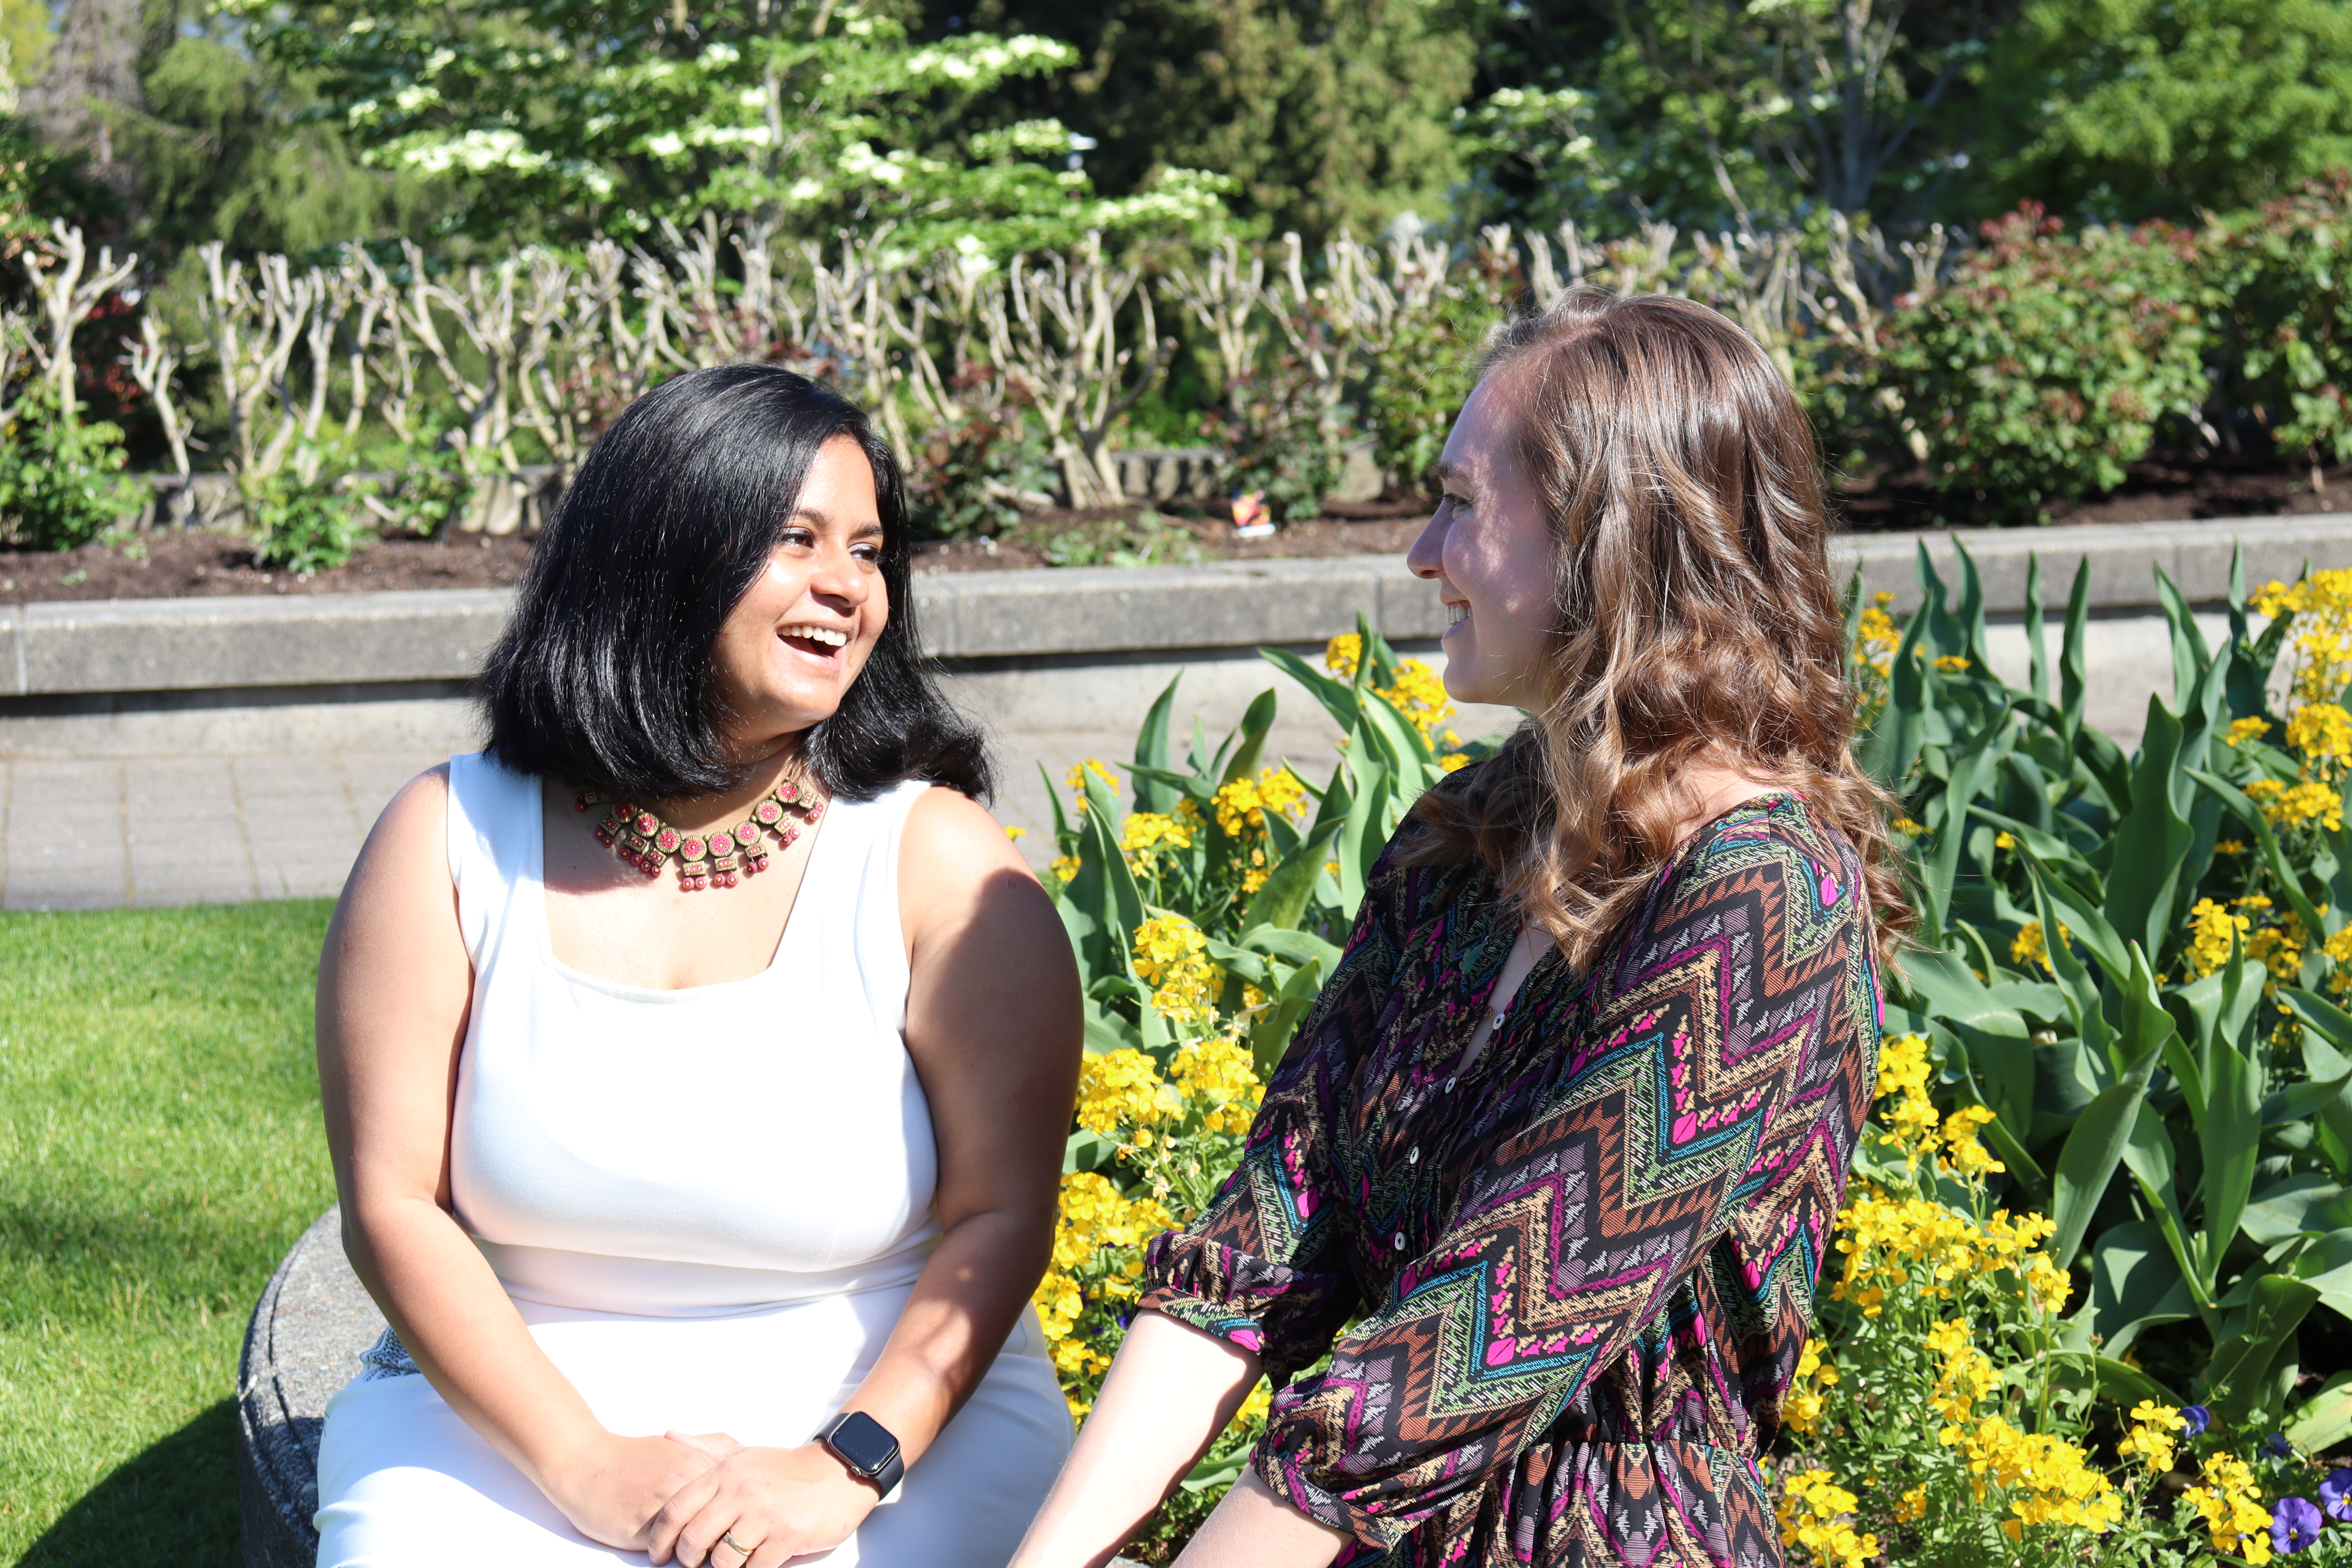 Meghna and Madison laughing with each other in sunny garden